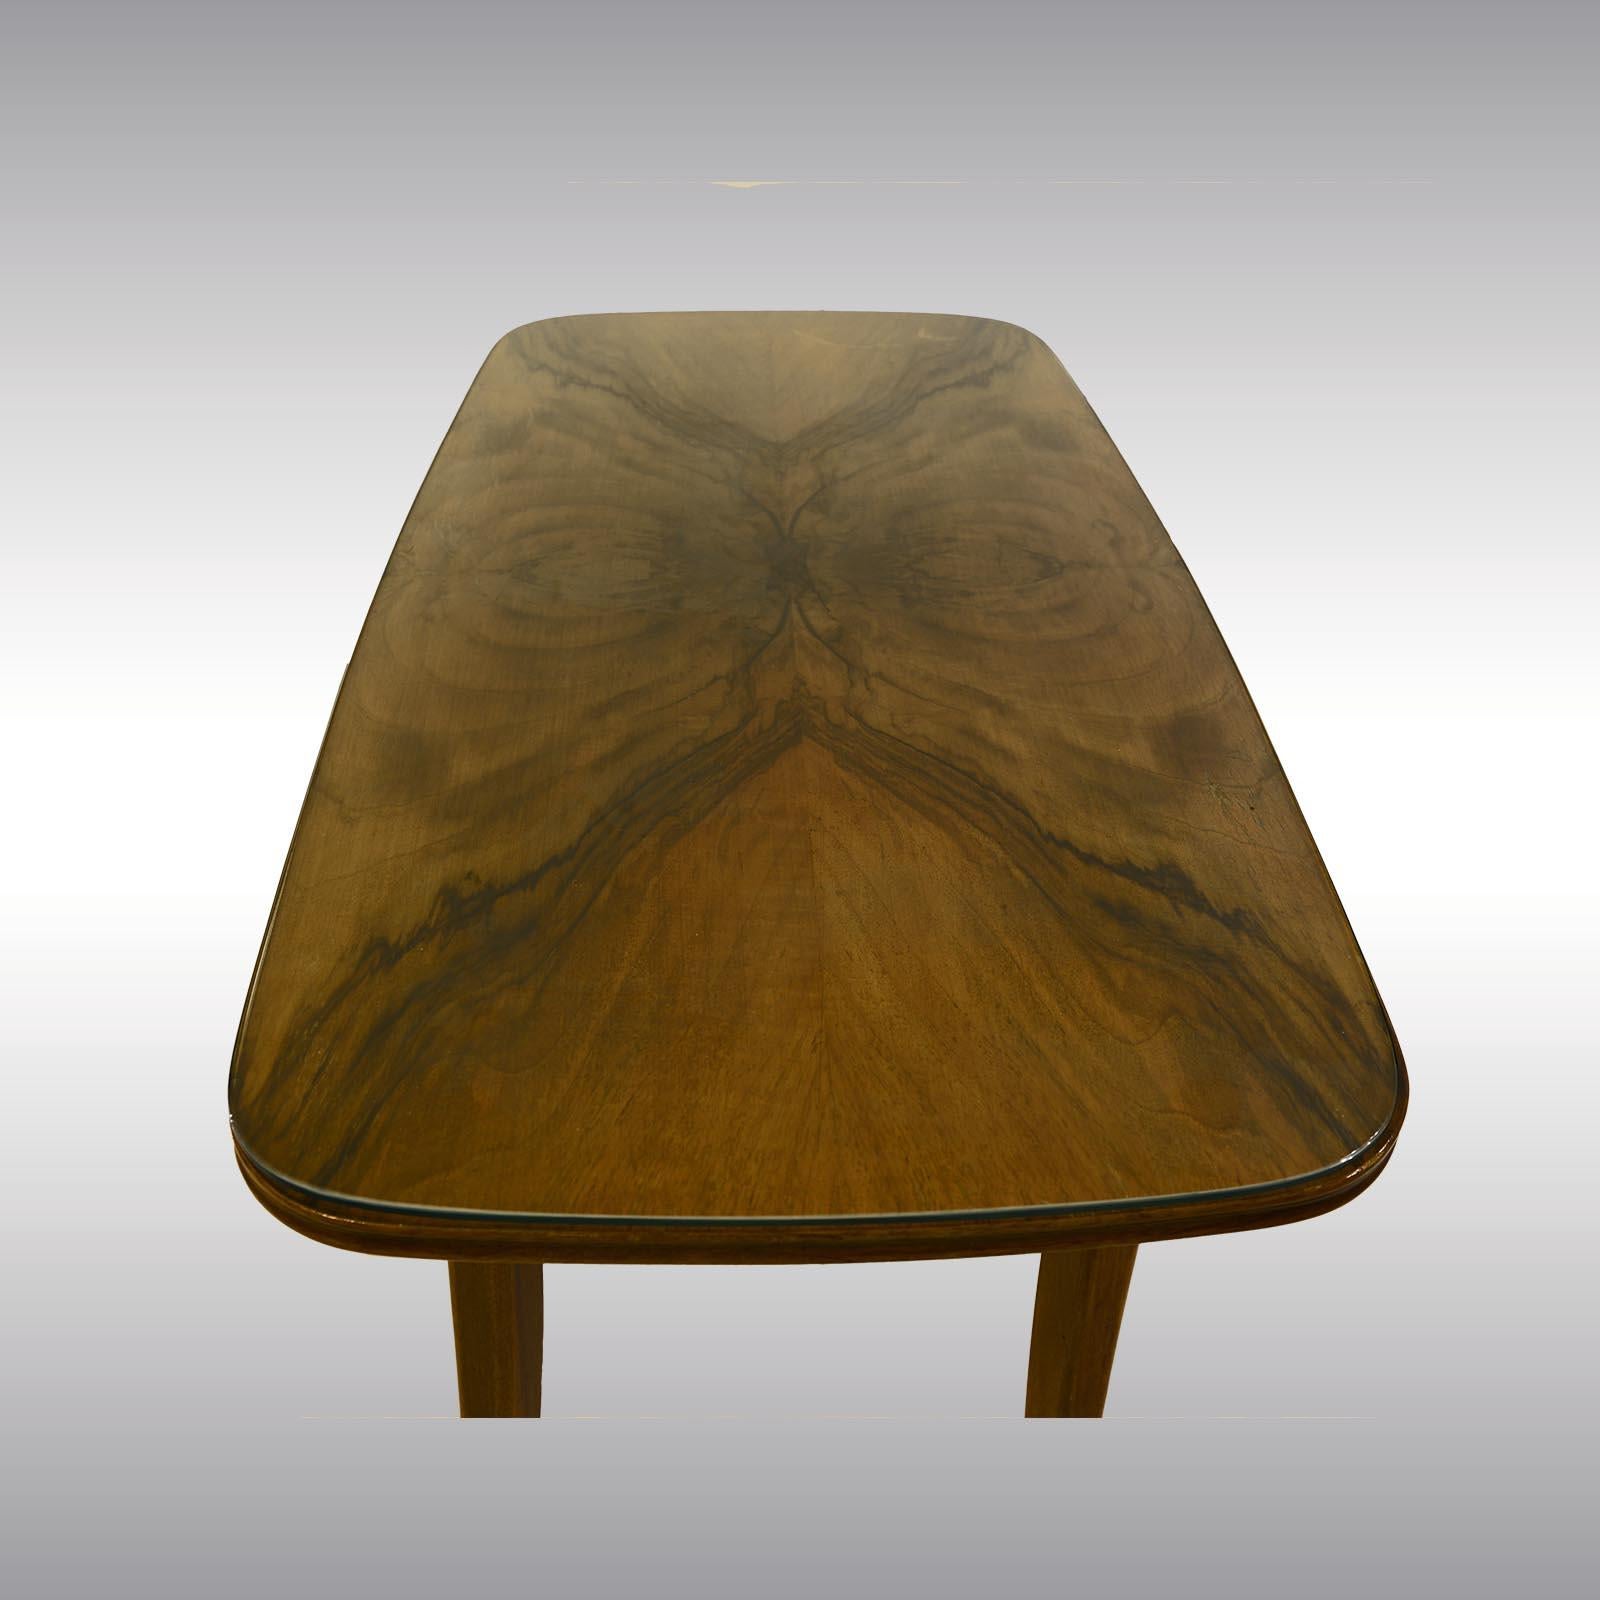 Josef Frank and Svensk Tenn Attributed Table Original Mid-Century Modern, 1940 In Good Condition For Sale In Vienna, AT